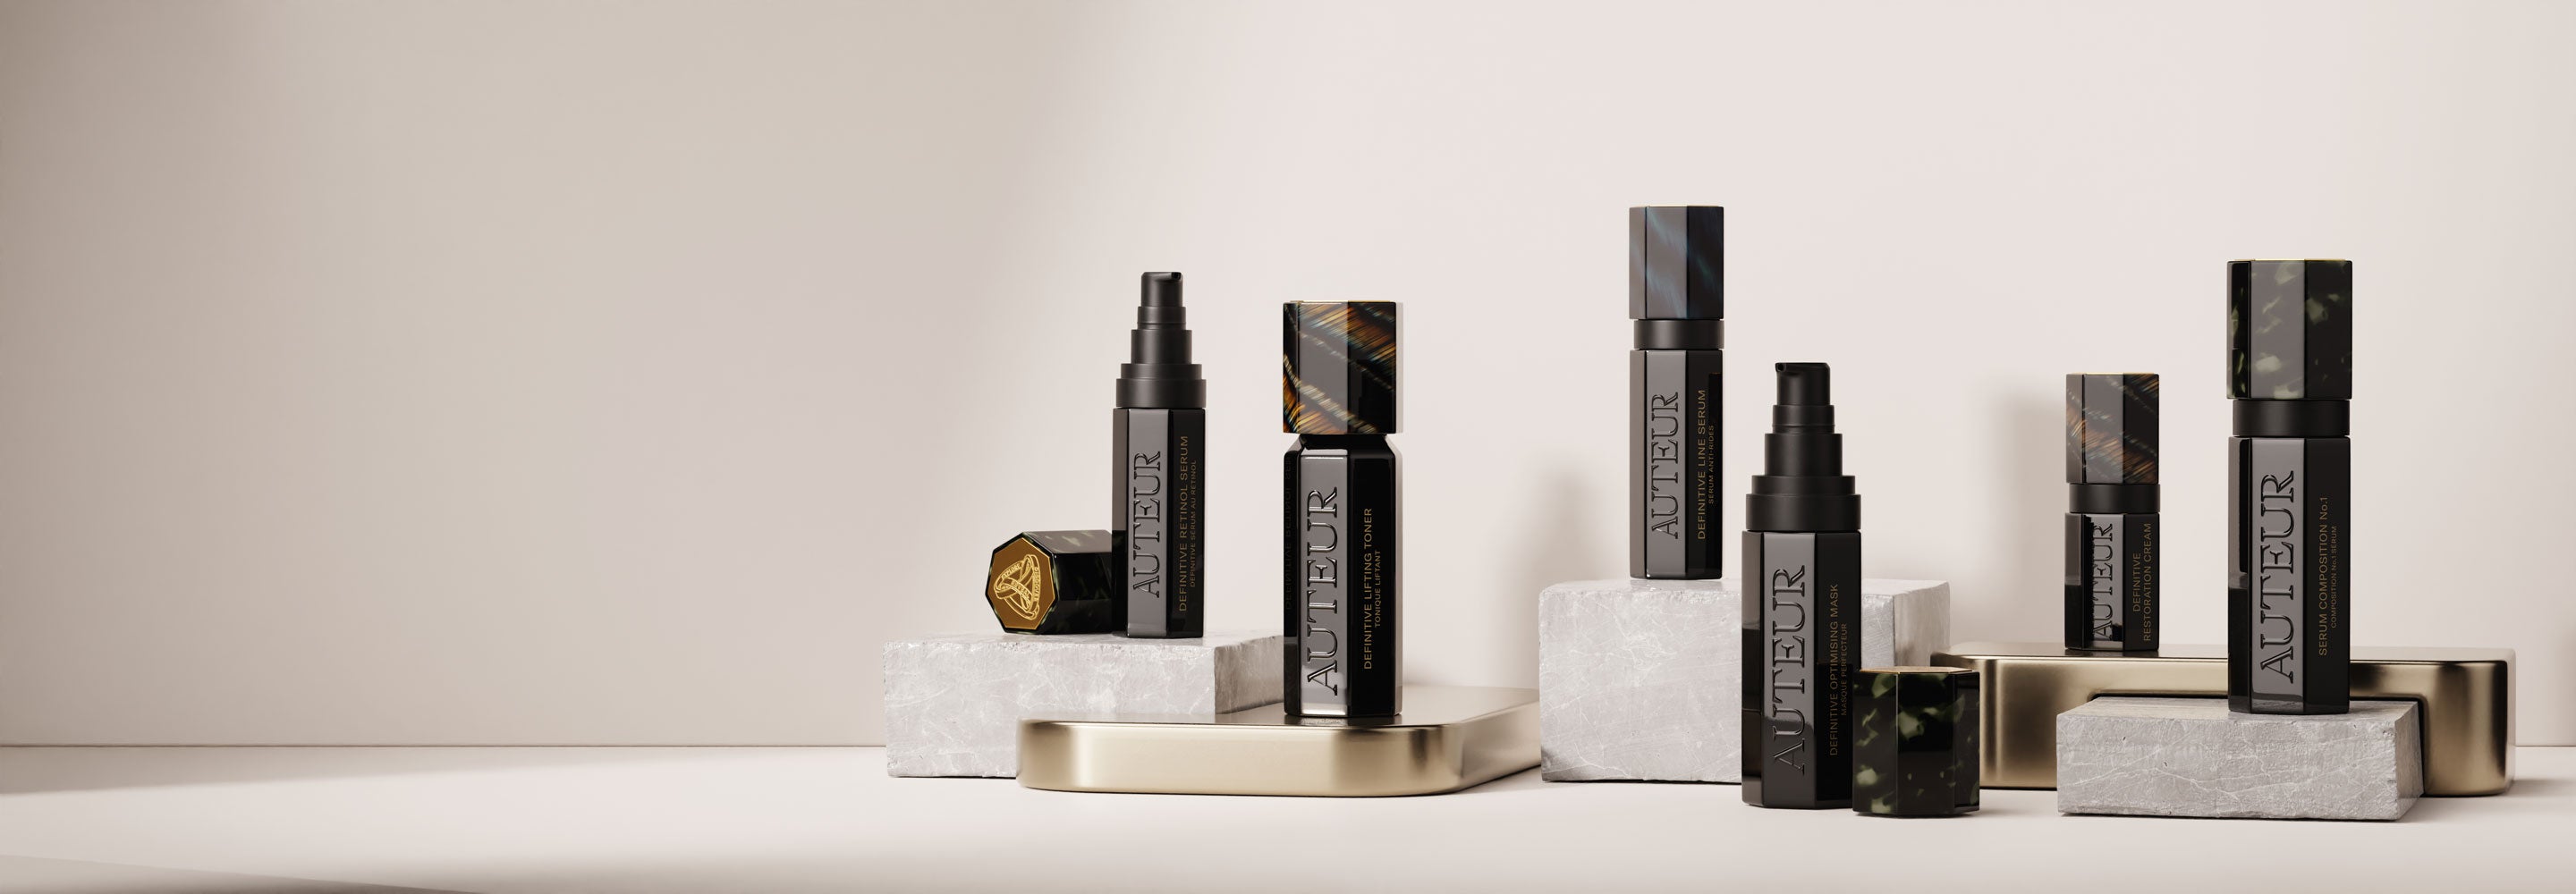 High-active compositions elevating skincare to an art form and your deepest authentic beauty to your surface.